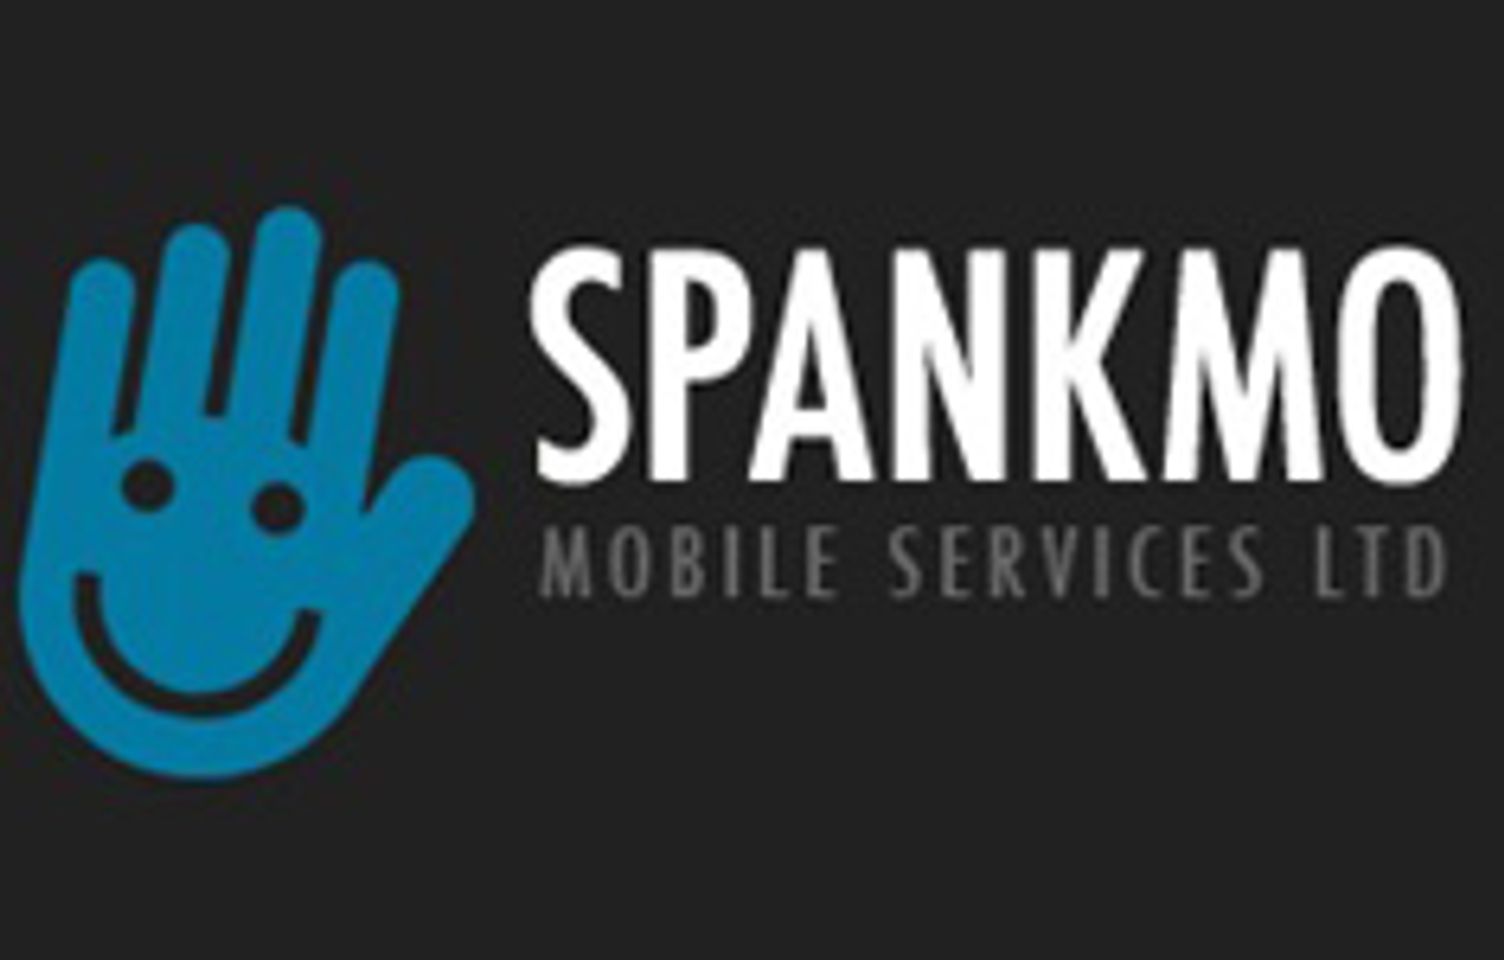 Spankmo Mobile: We’re ready for the iPad!